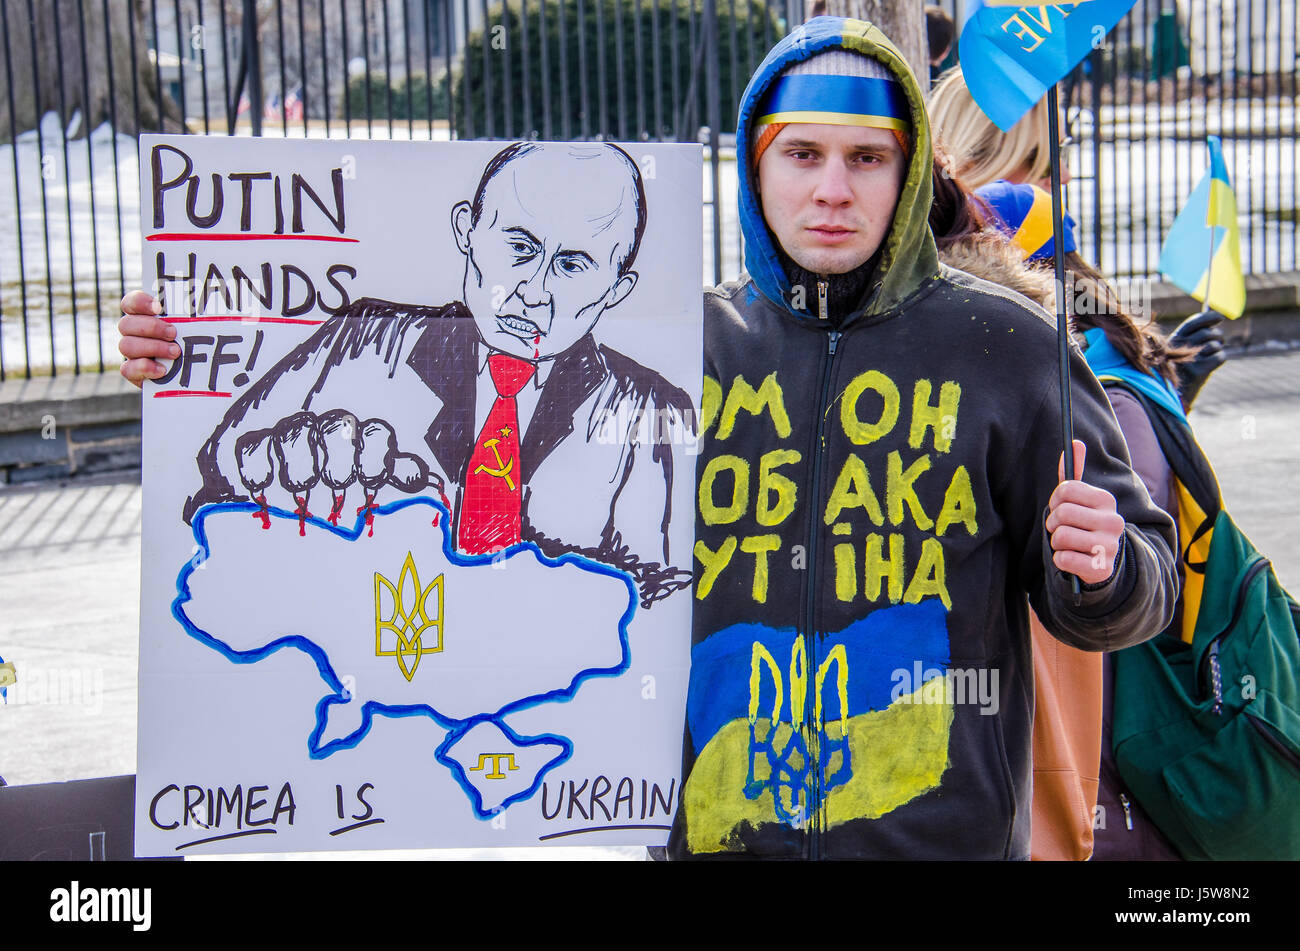 Washington DC, USA - March 6, 2014: Closeup of man with sign about Russia and Putin during Ukrainian protest by White House Stock Photo